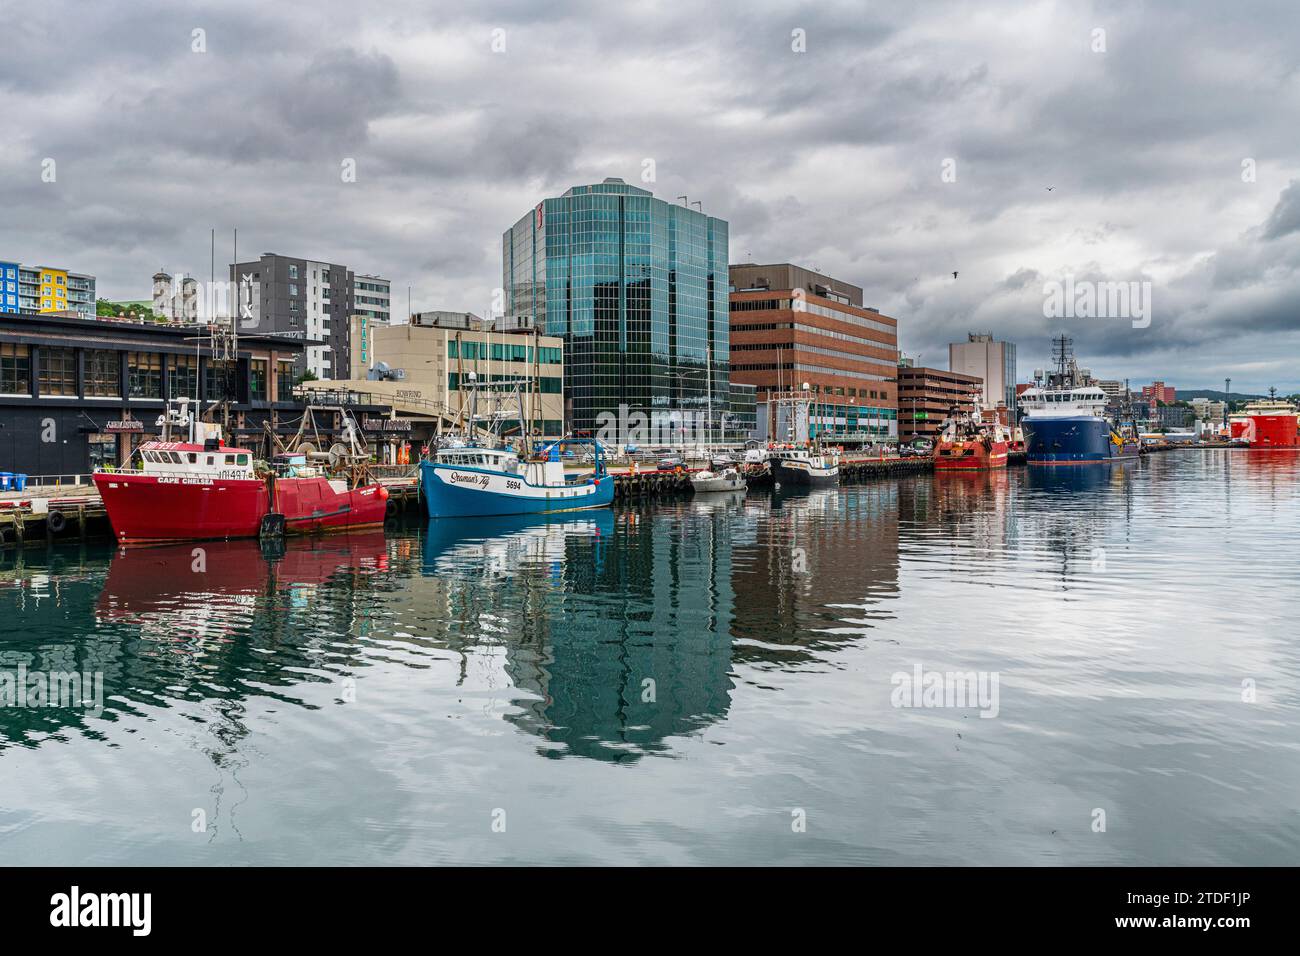 Boat harbour of St. John's, Newfoundland, Canada, North America Stock Photo